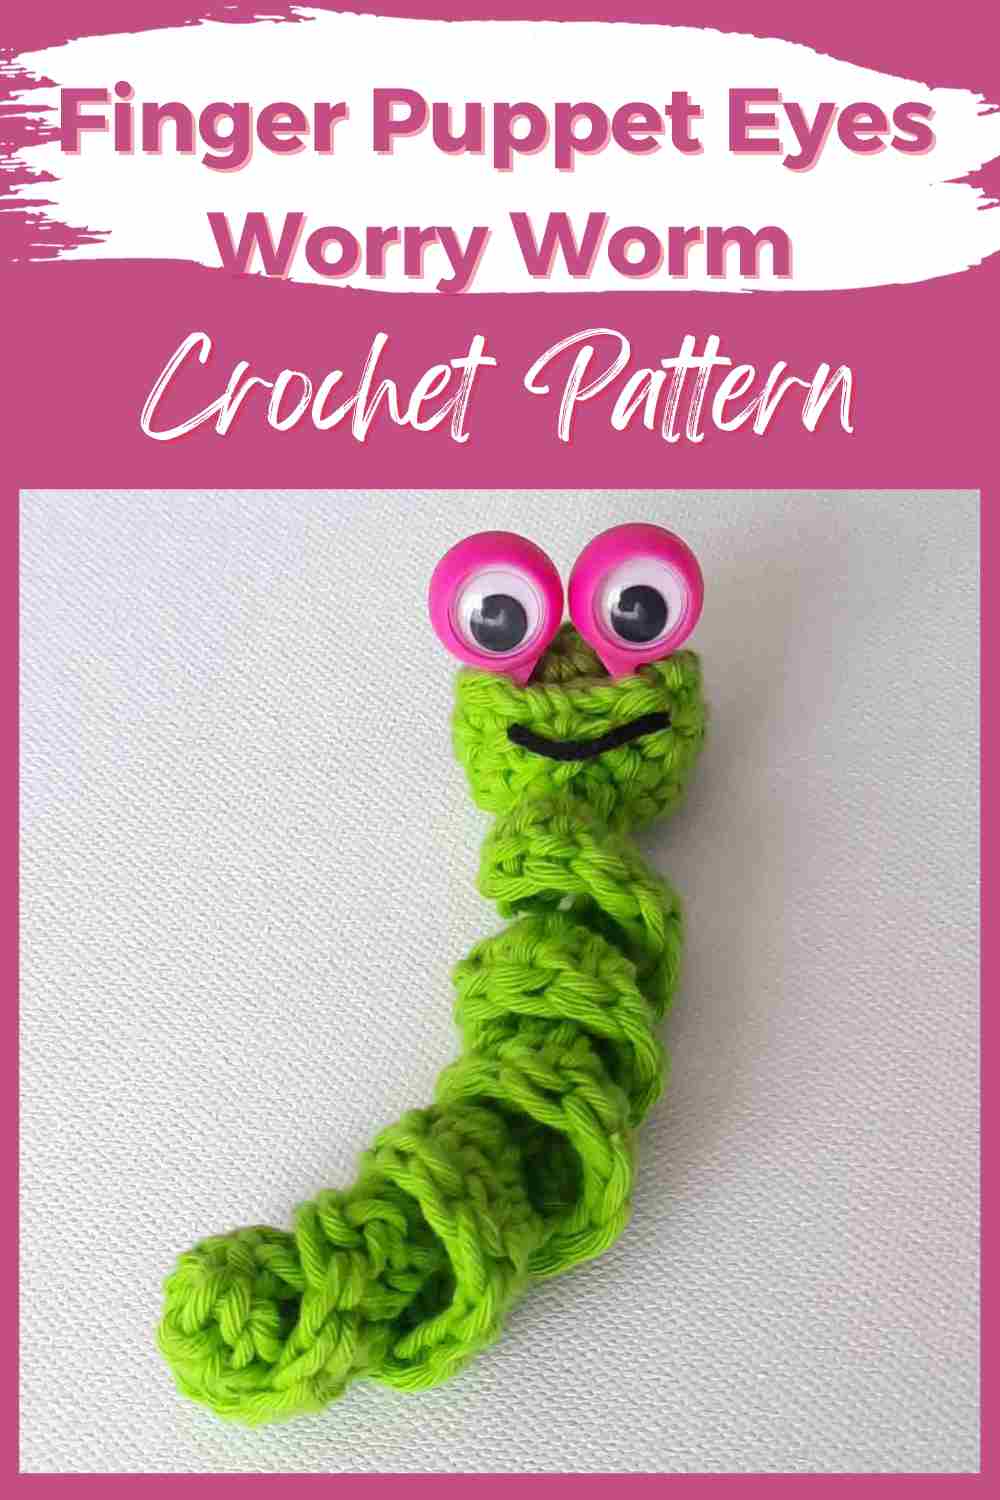 Finger puppet eyes worry worm pattern (7)